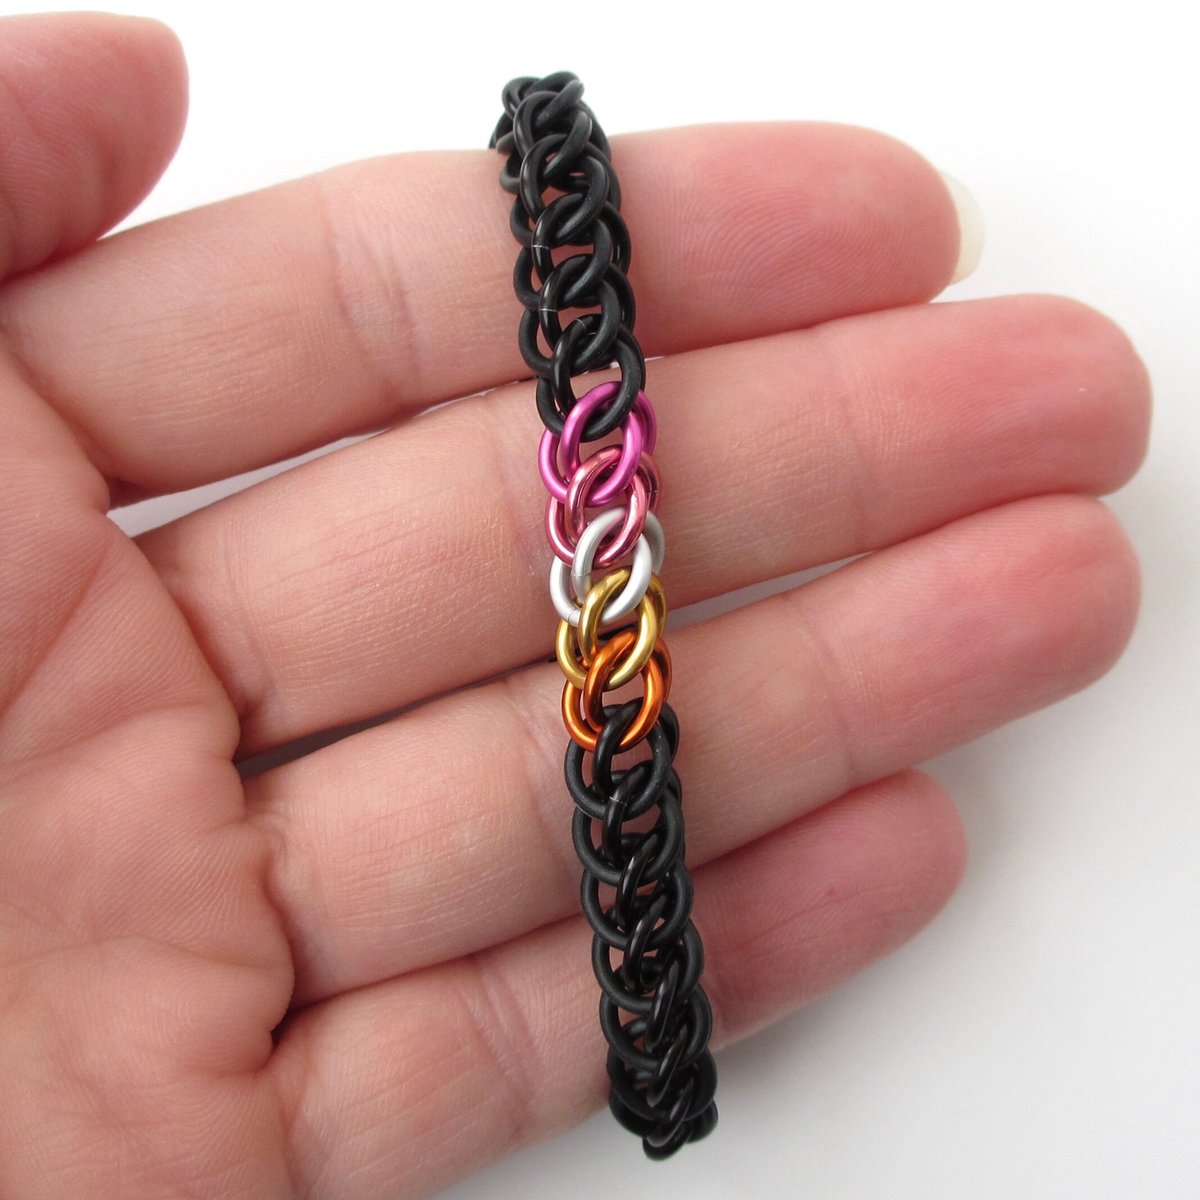 Lesbian pride stretchy chainmail bracelet, half Persian 3 in 1 weave, discreet LGBTQ gifts